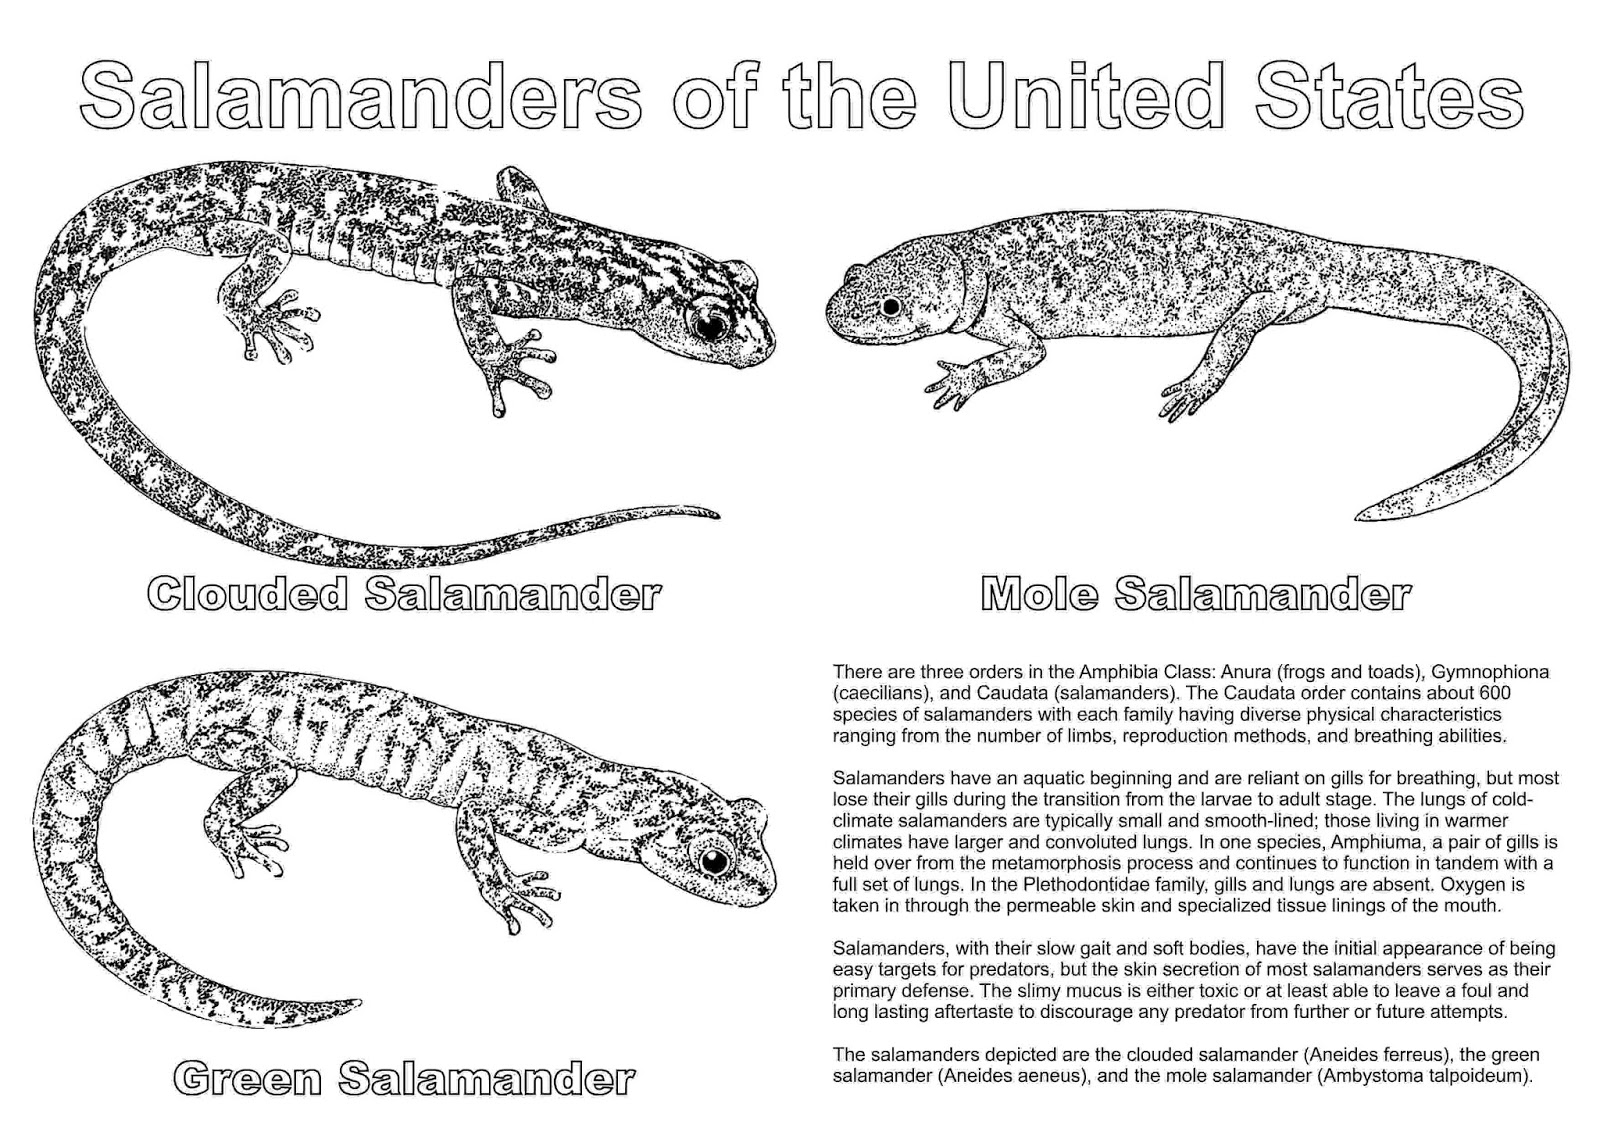 the-nations-of-the-world-salamanders-of-the-united-states